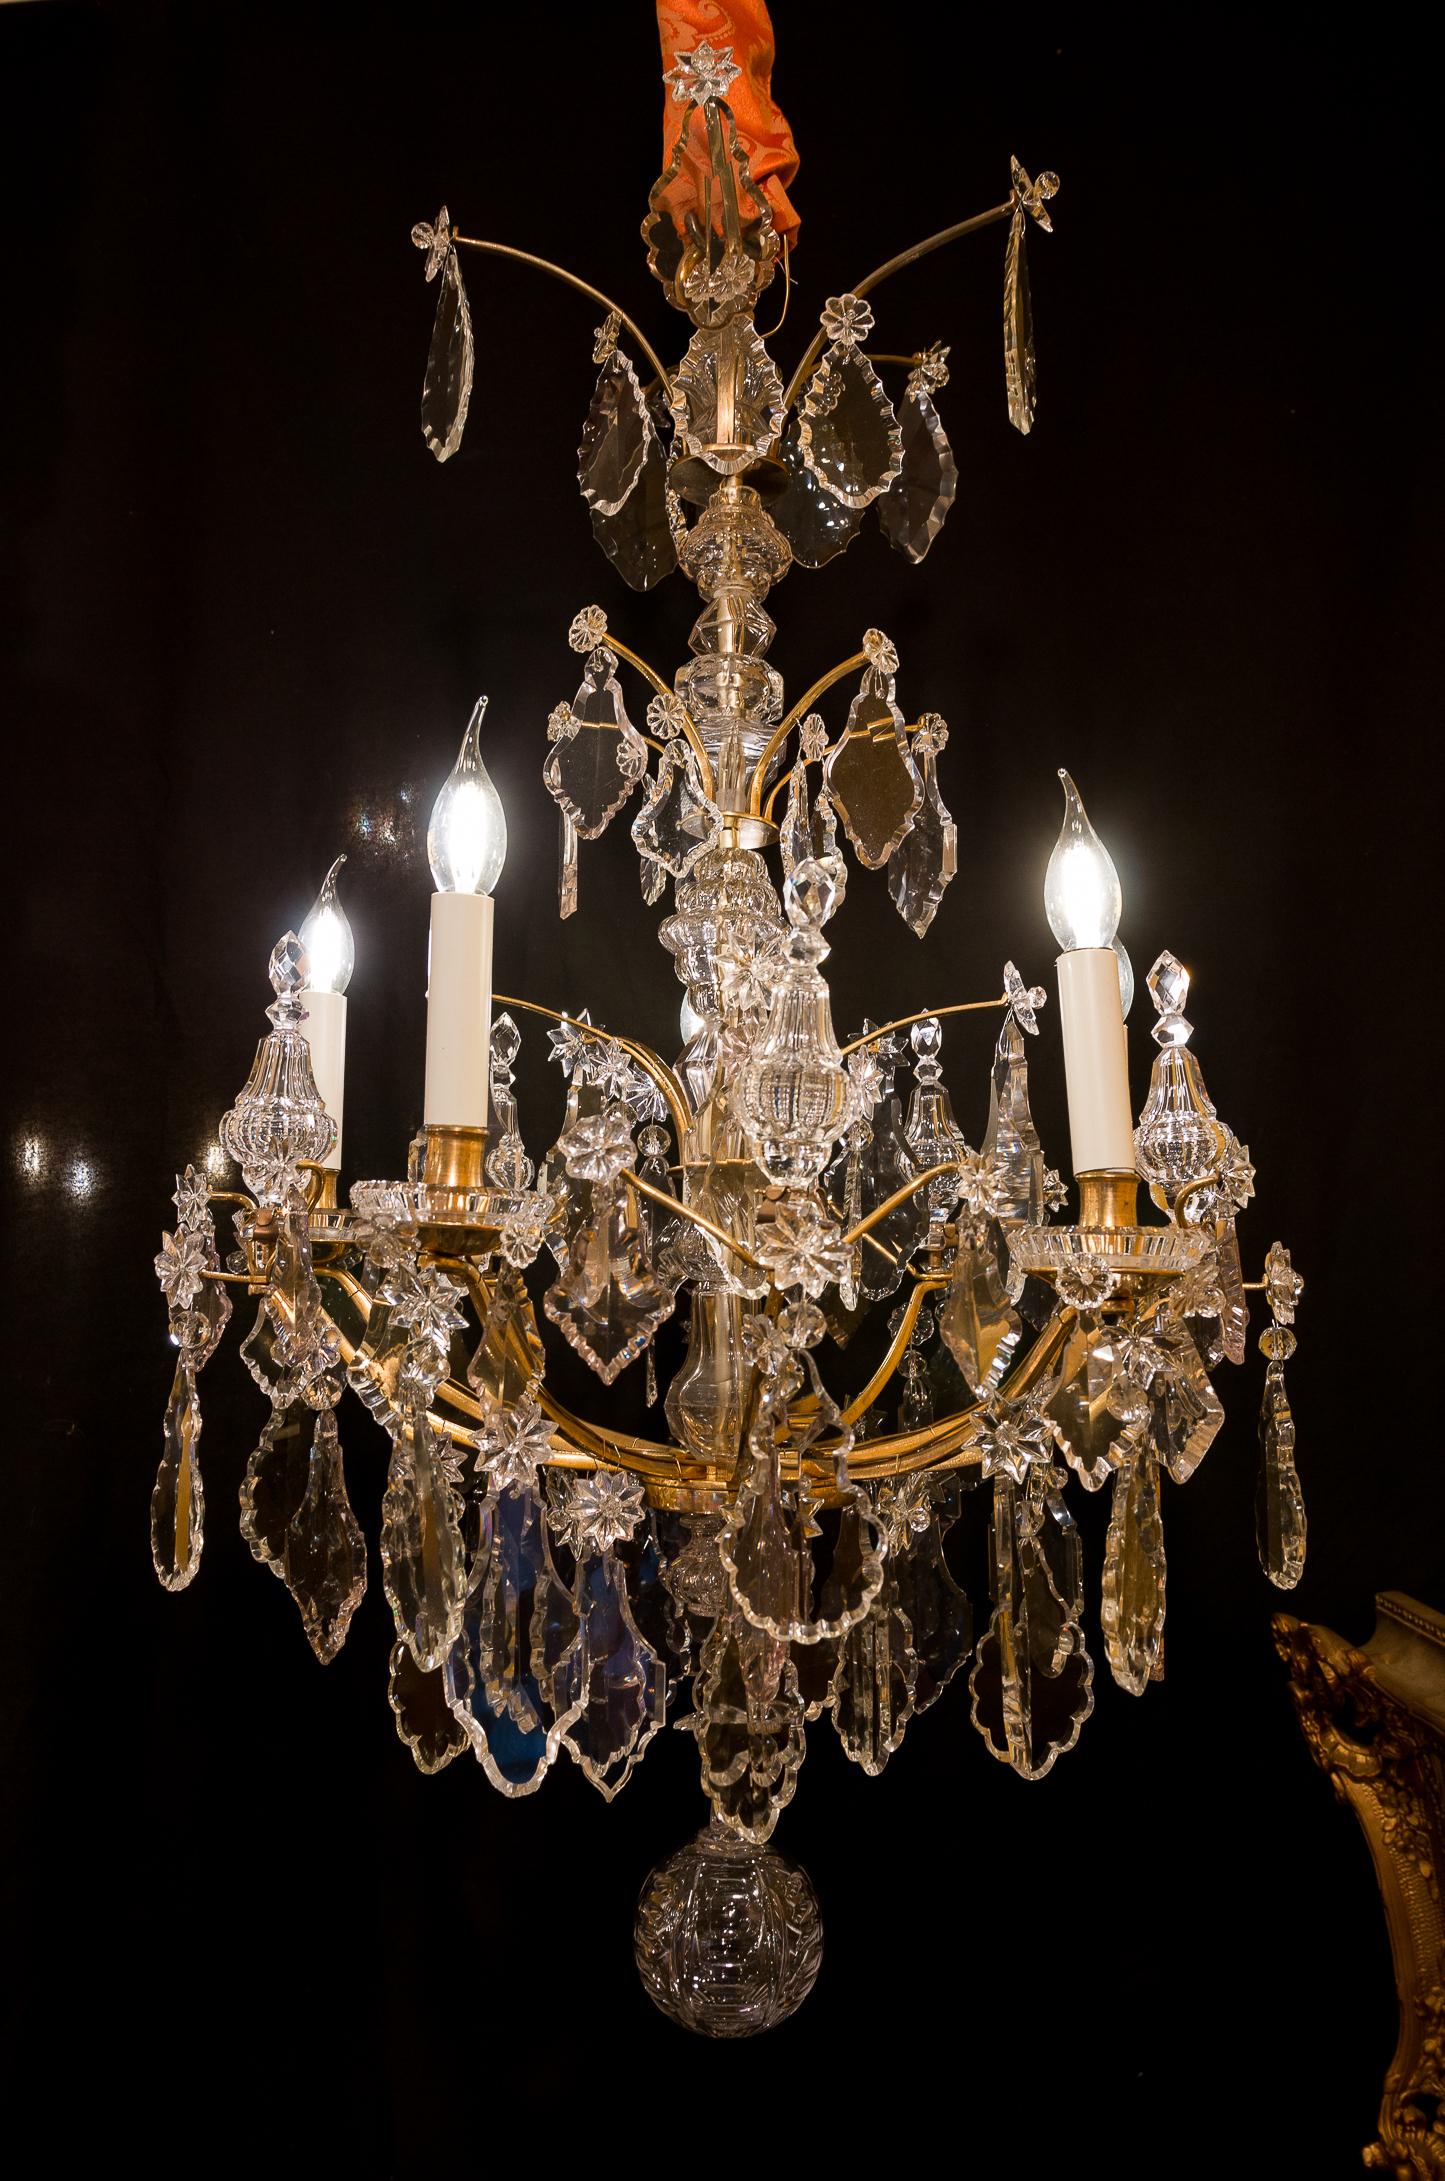 Sign by Cristalleries de Baccarat gilt bronze and cut crystal chandelier, circa 1880

A beautiful original gilt-bronze and cut crystal chandelier in the classic French 18th-century style. 
Our chandelier is composed of five perimeter arm-lights.